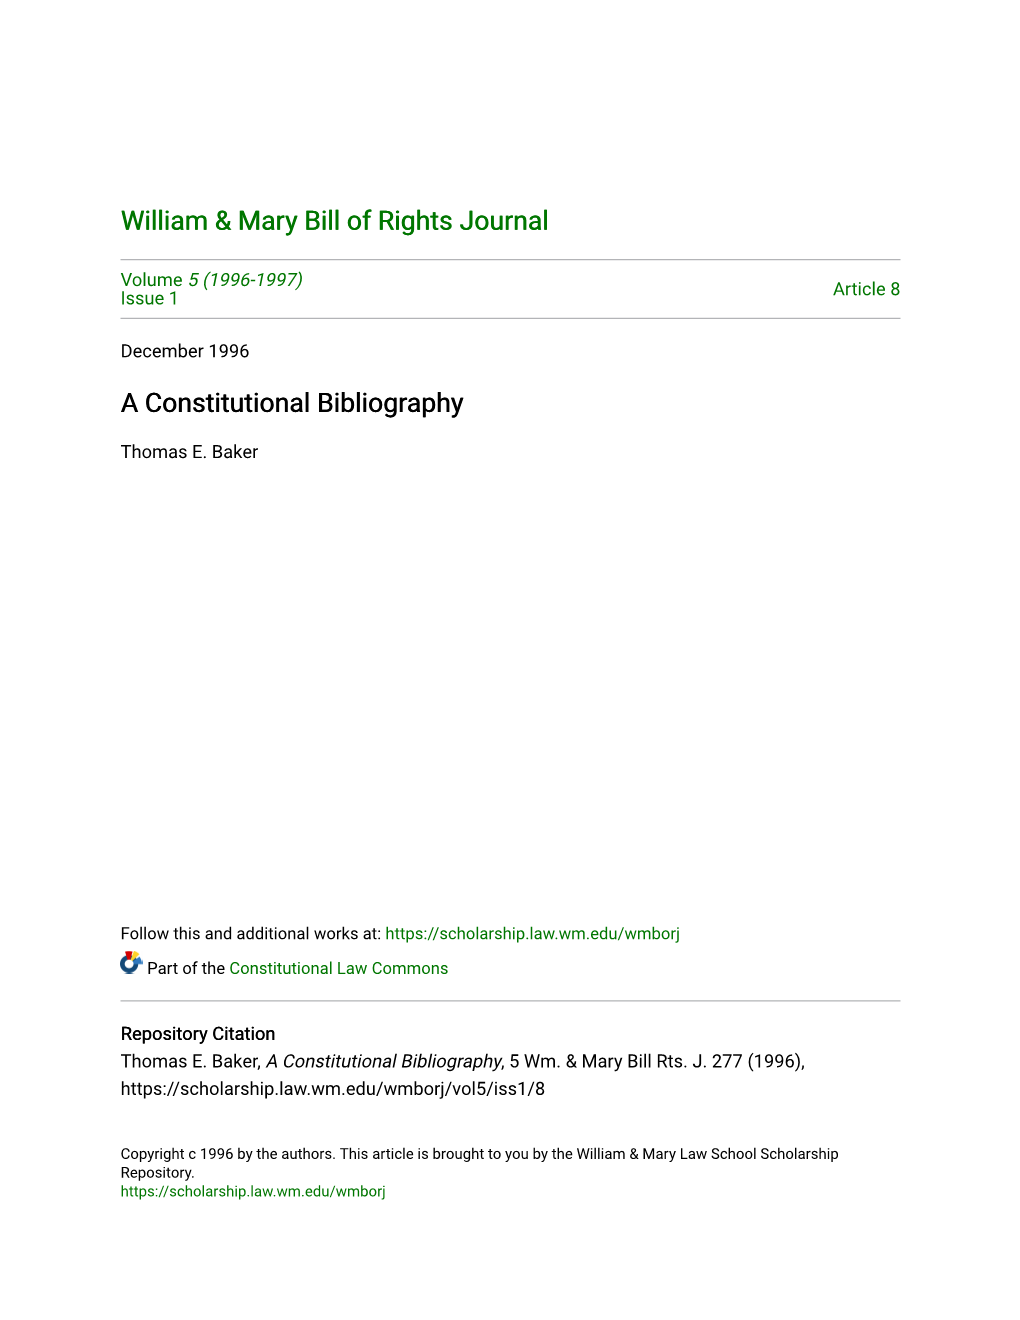 A Constitutional Bibliography